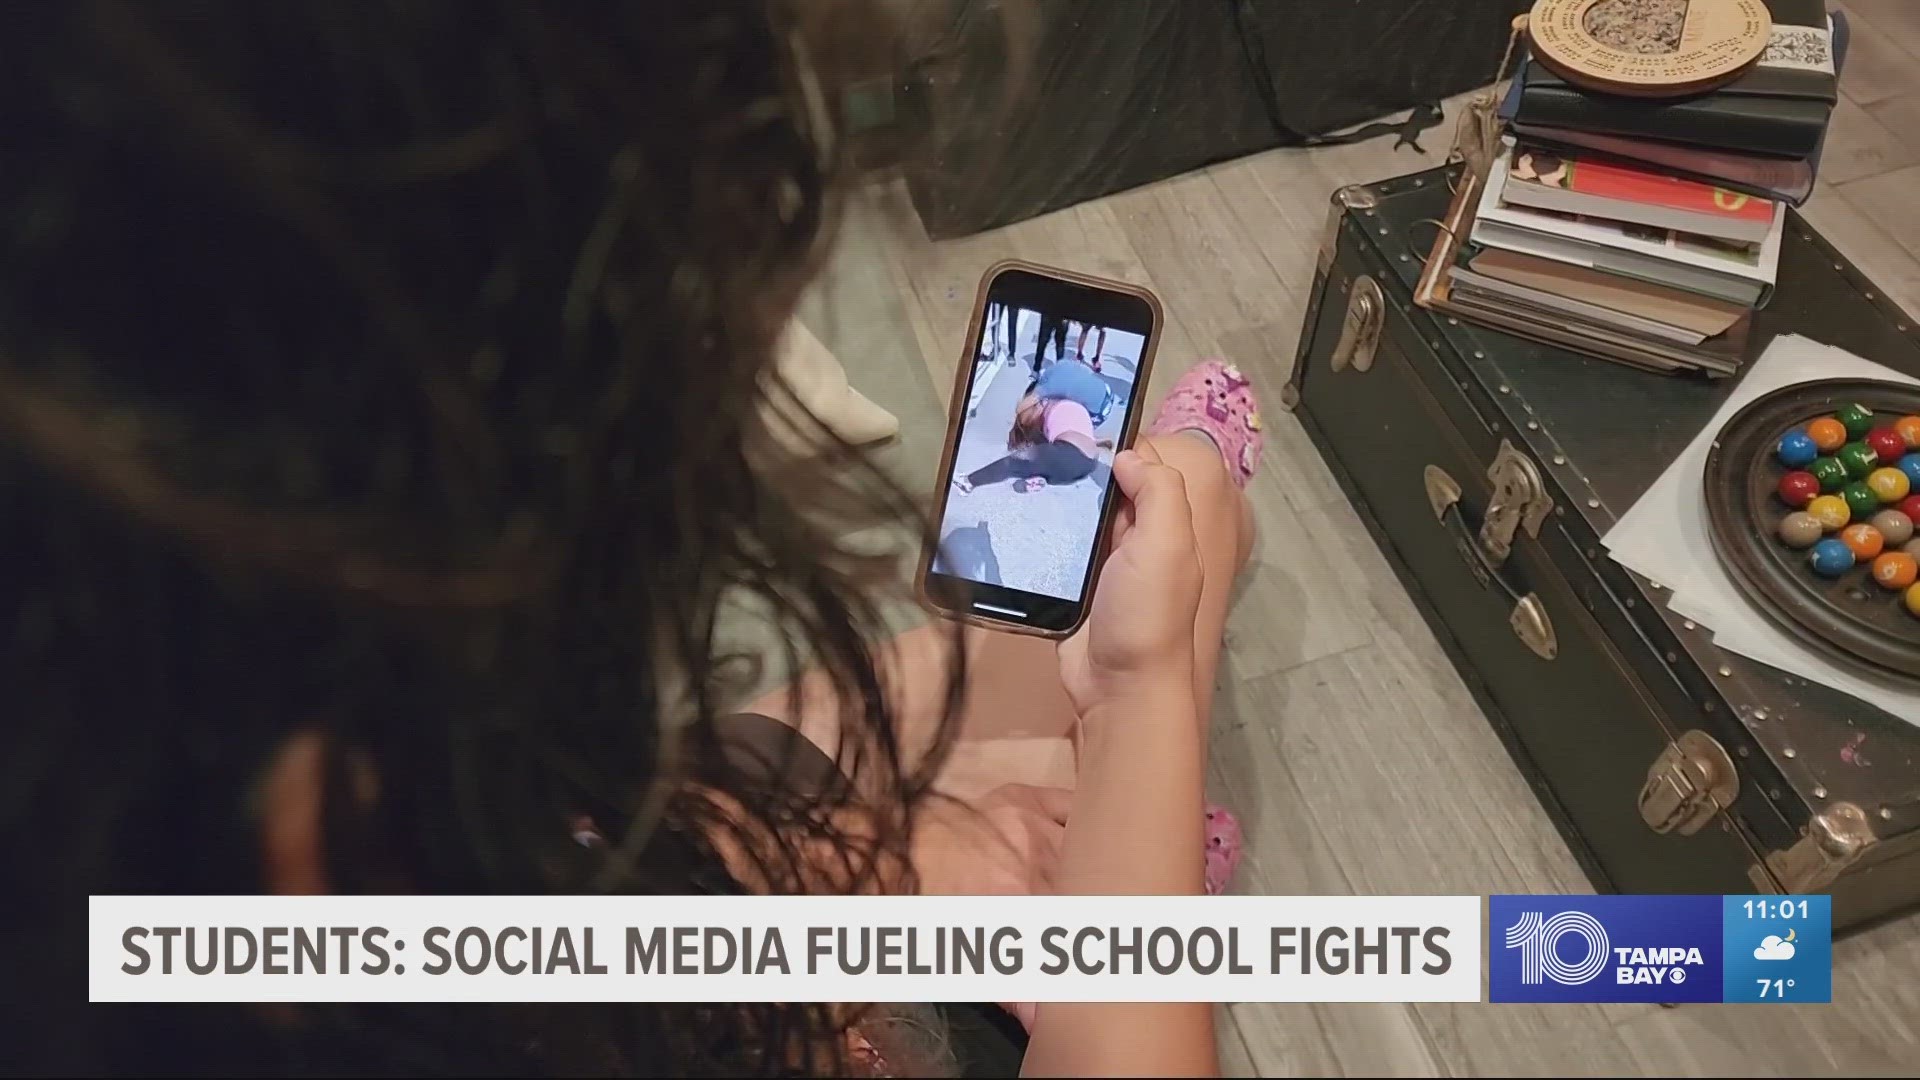 Pinellas County Schools say while fighting is "not the norm," it's often "exacerbated by the sharing of videos on social media."